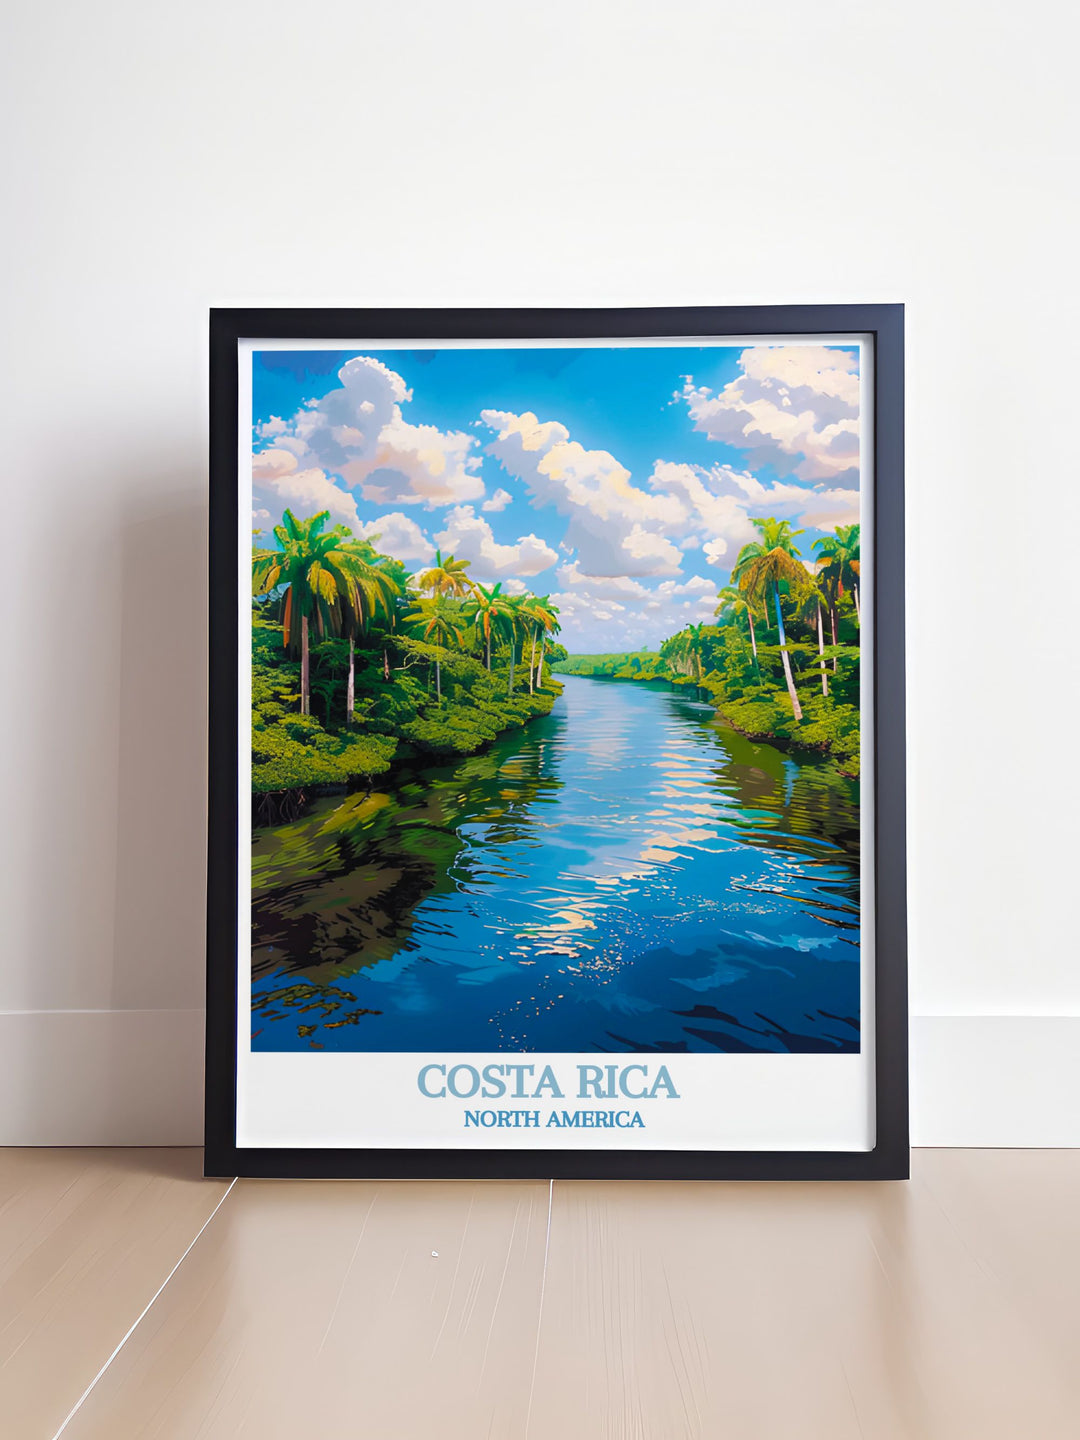 Stunning Tortuguero National Park poster featuring the lush rainforests and vibrant wildlife, perfect for adding a touch of Costa Ricas natural beauty to your home decor.